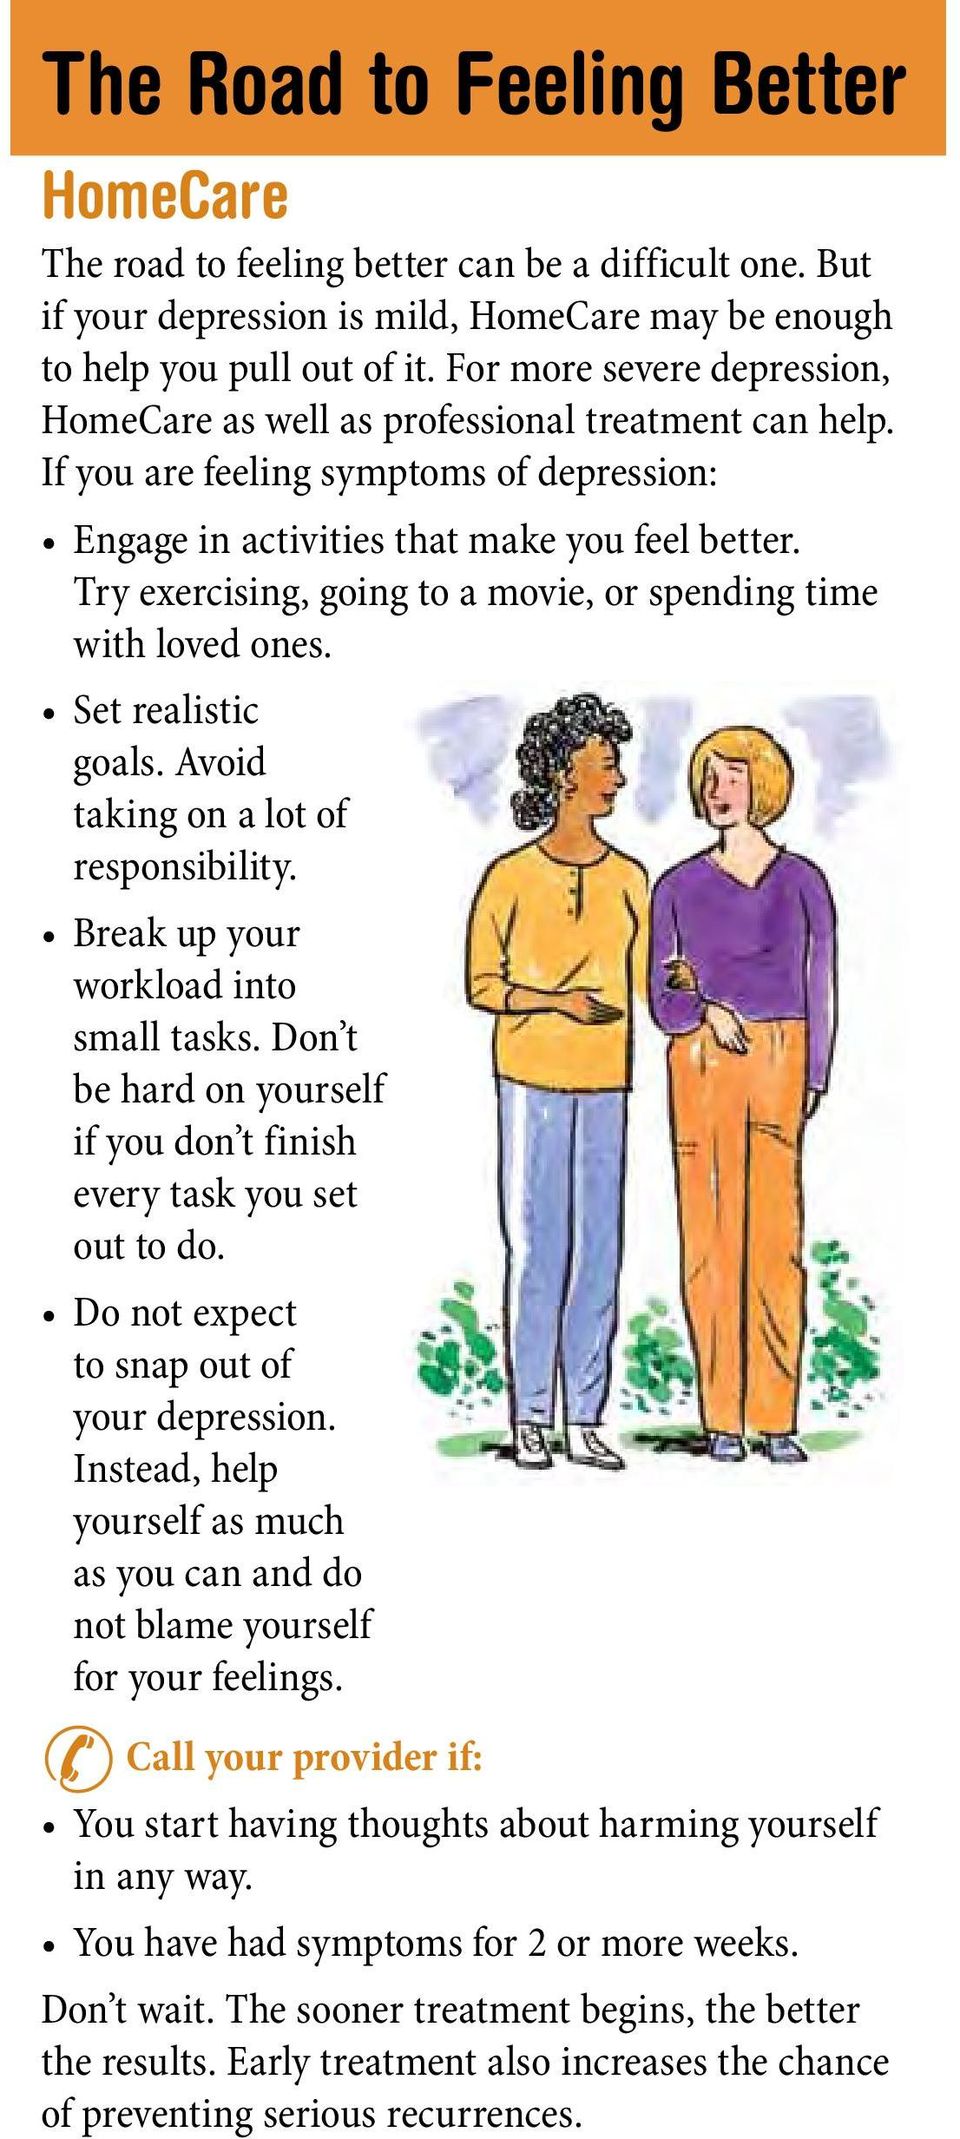 Try exercising, going to a movie, or spending time with loved ones. Set realistic goals. Avoid taking on a lot of responsibility. Break up your workload into small tasks.